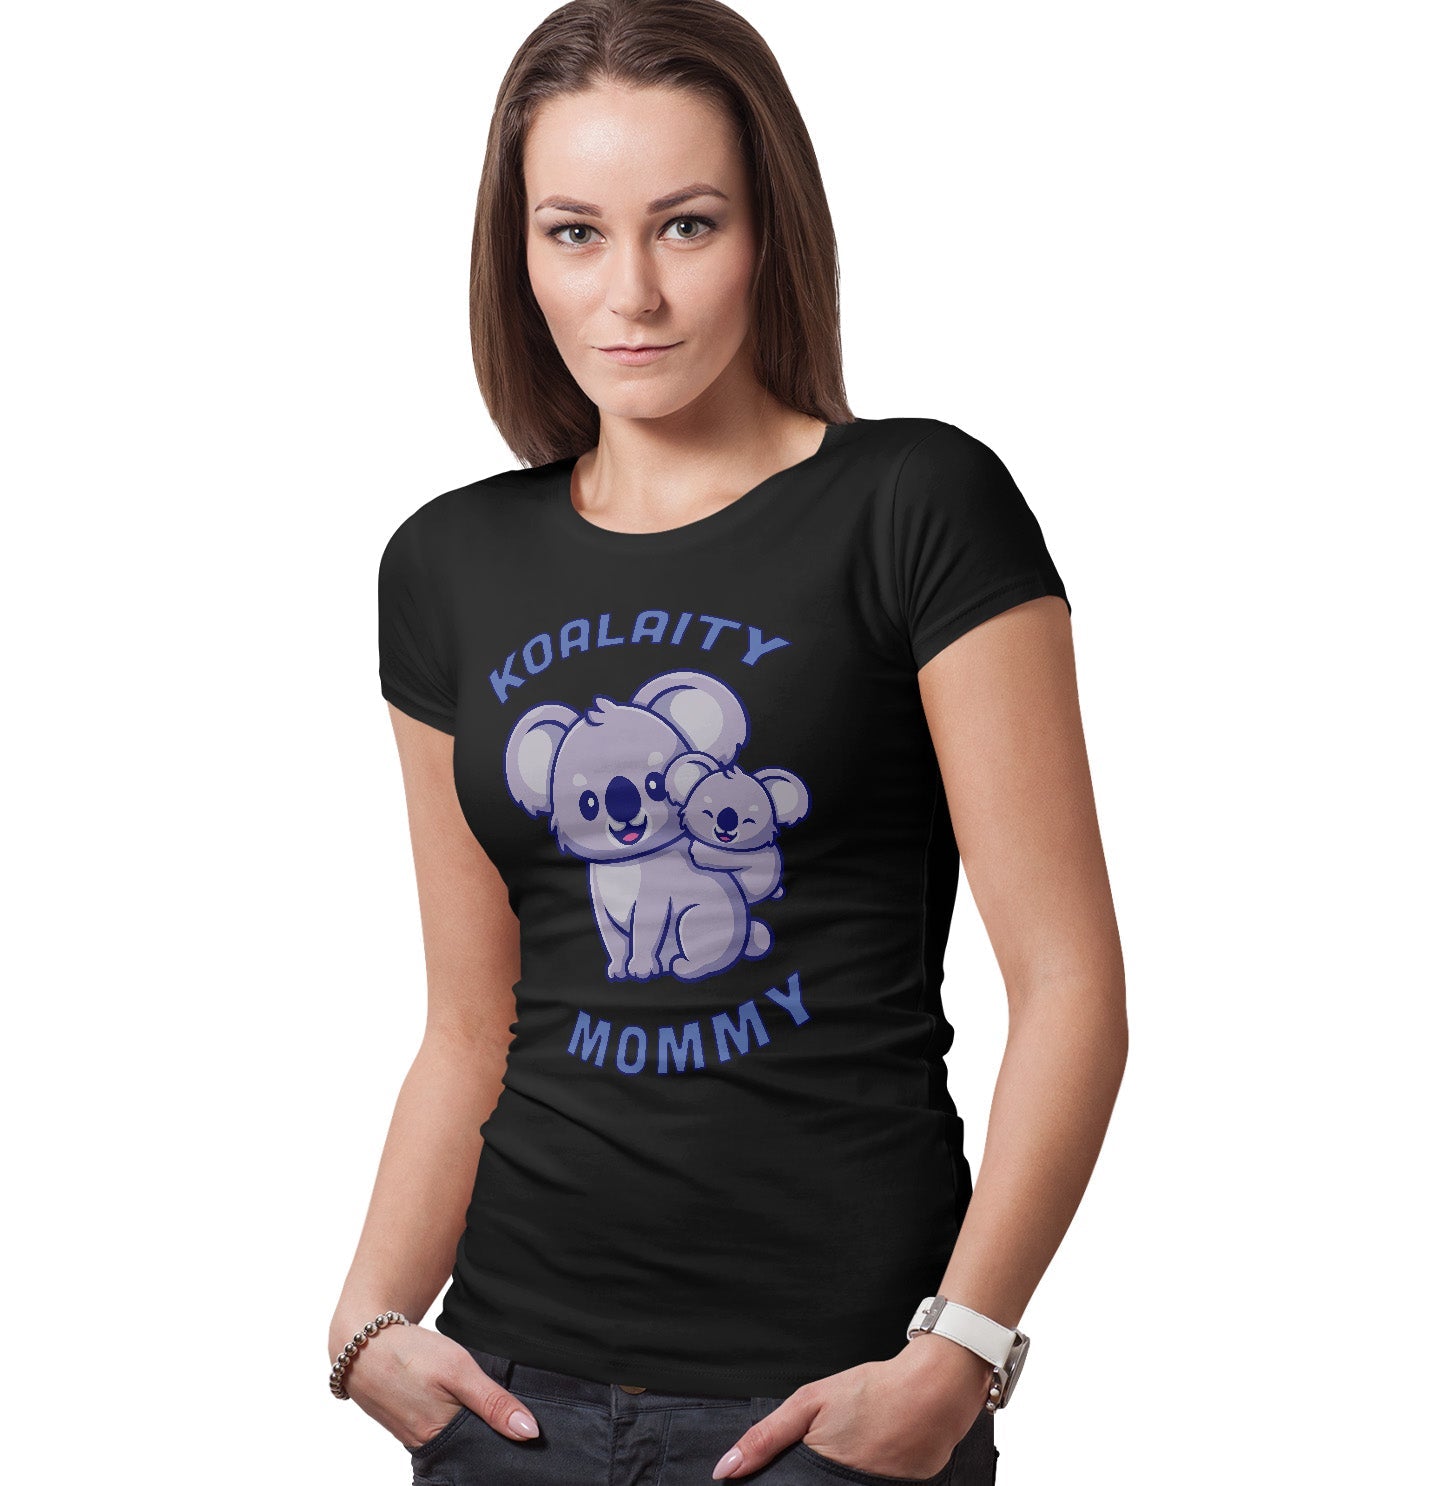 Koalaity Mommy - Women's Fitted T-Shirt